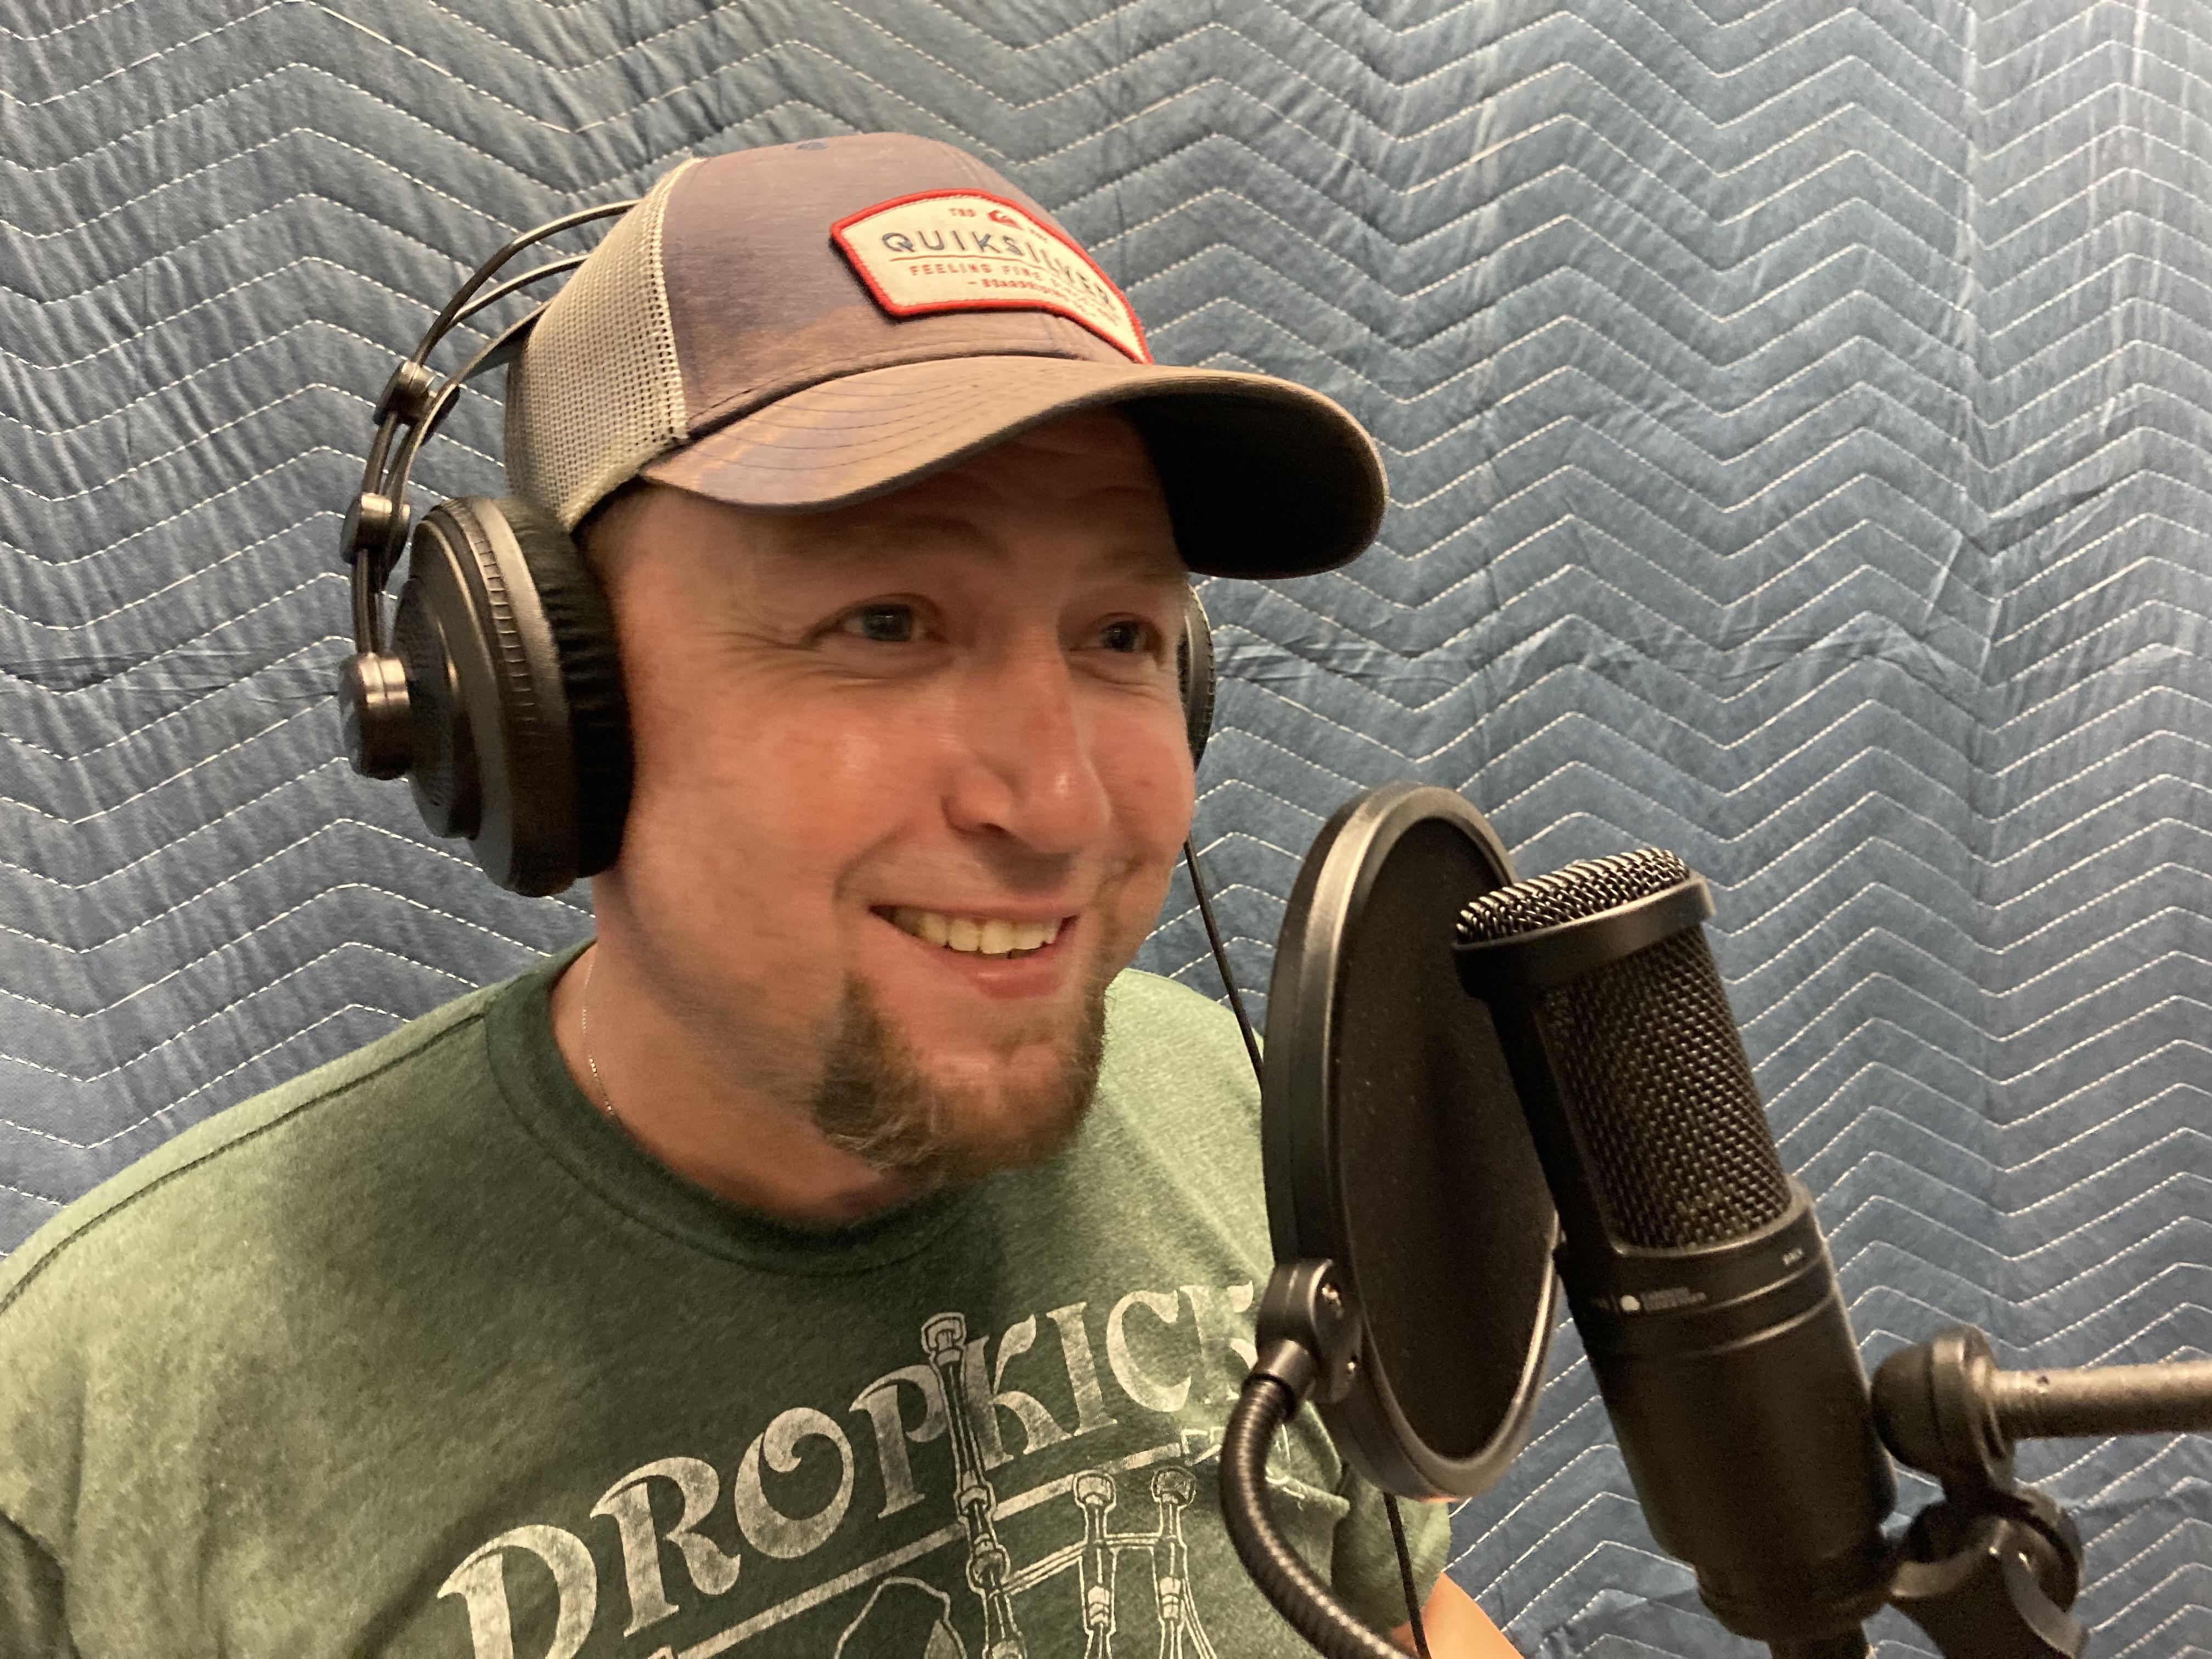 Binder podcast host Ray McManus smiling and talking into a microphone during production.